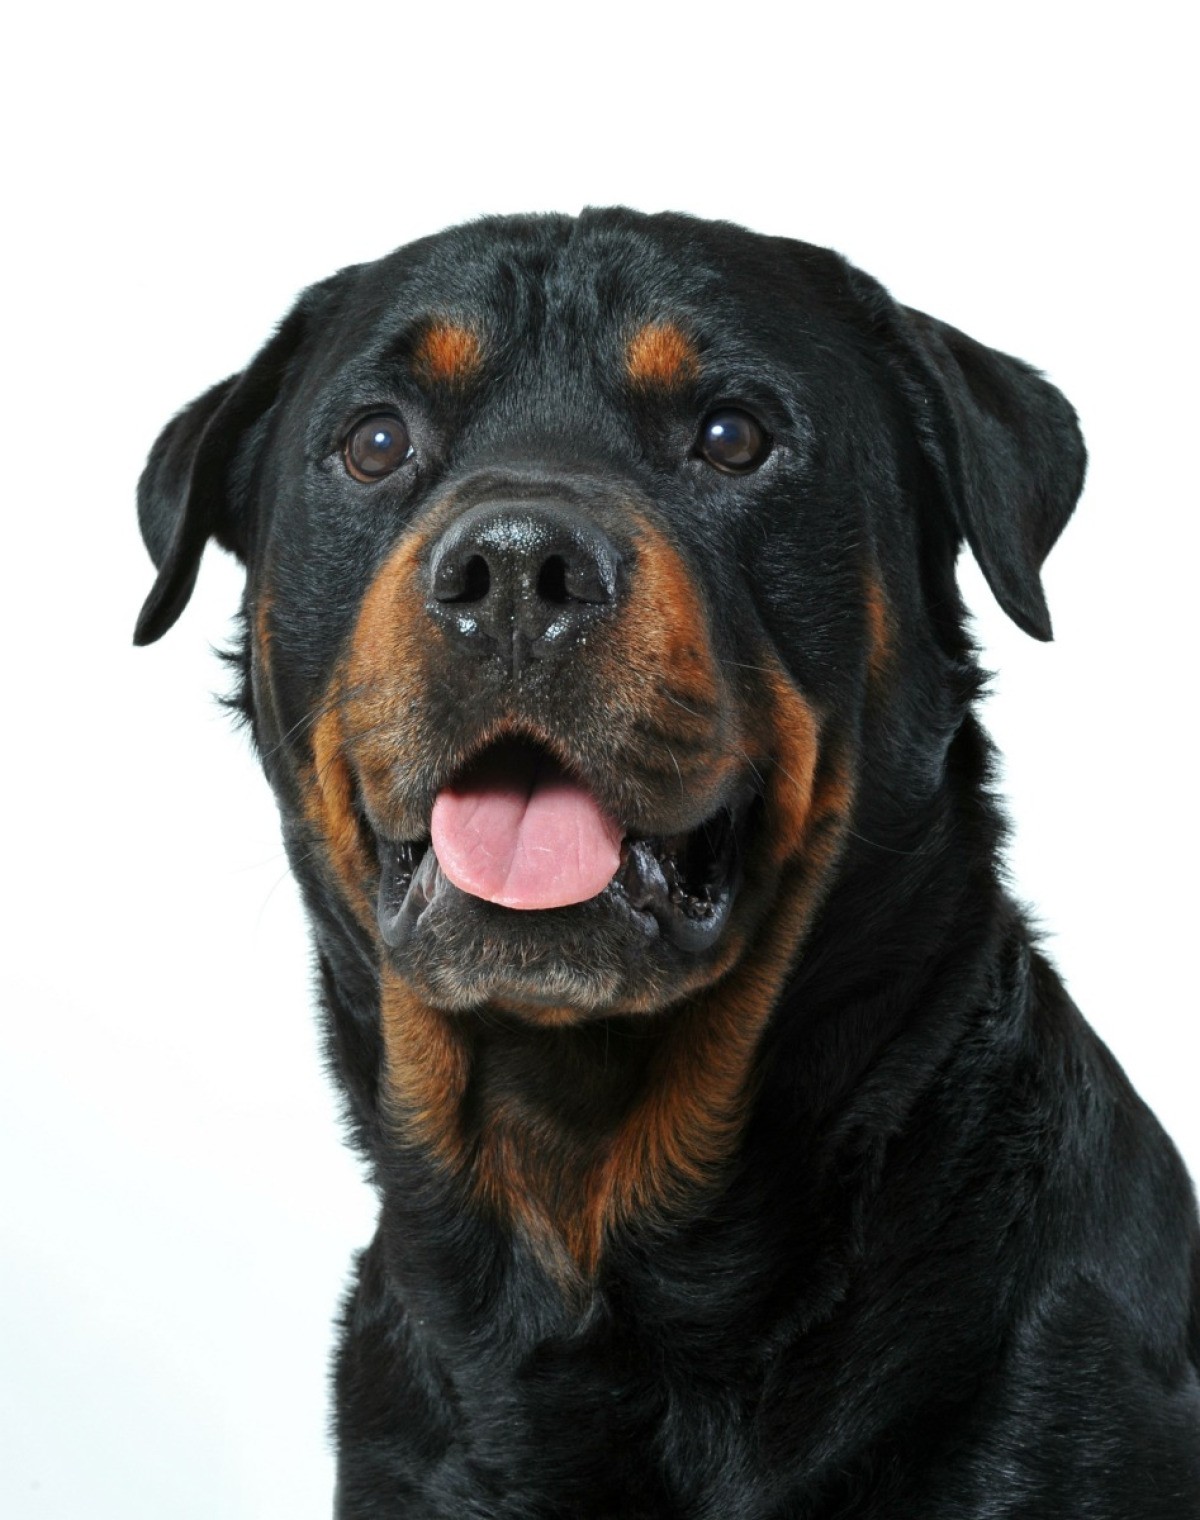 A Rottweiler dog during training